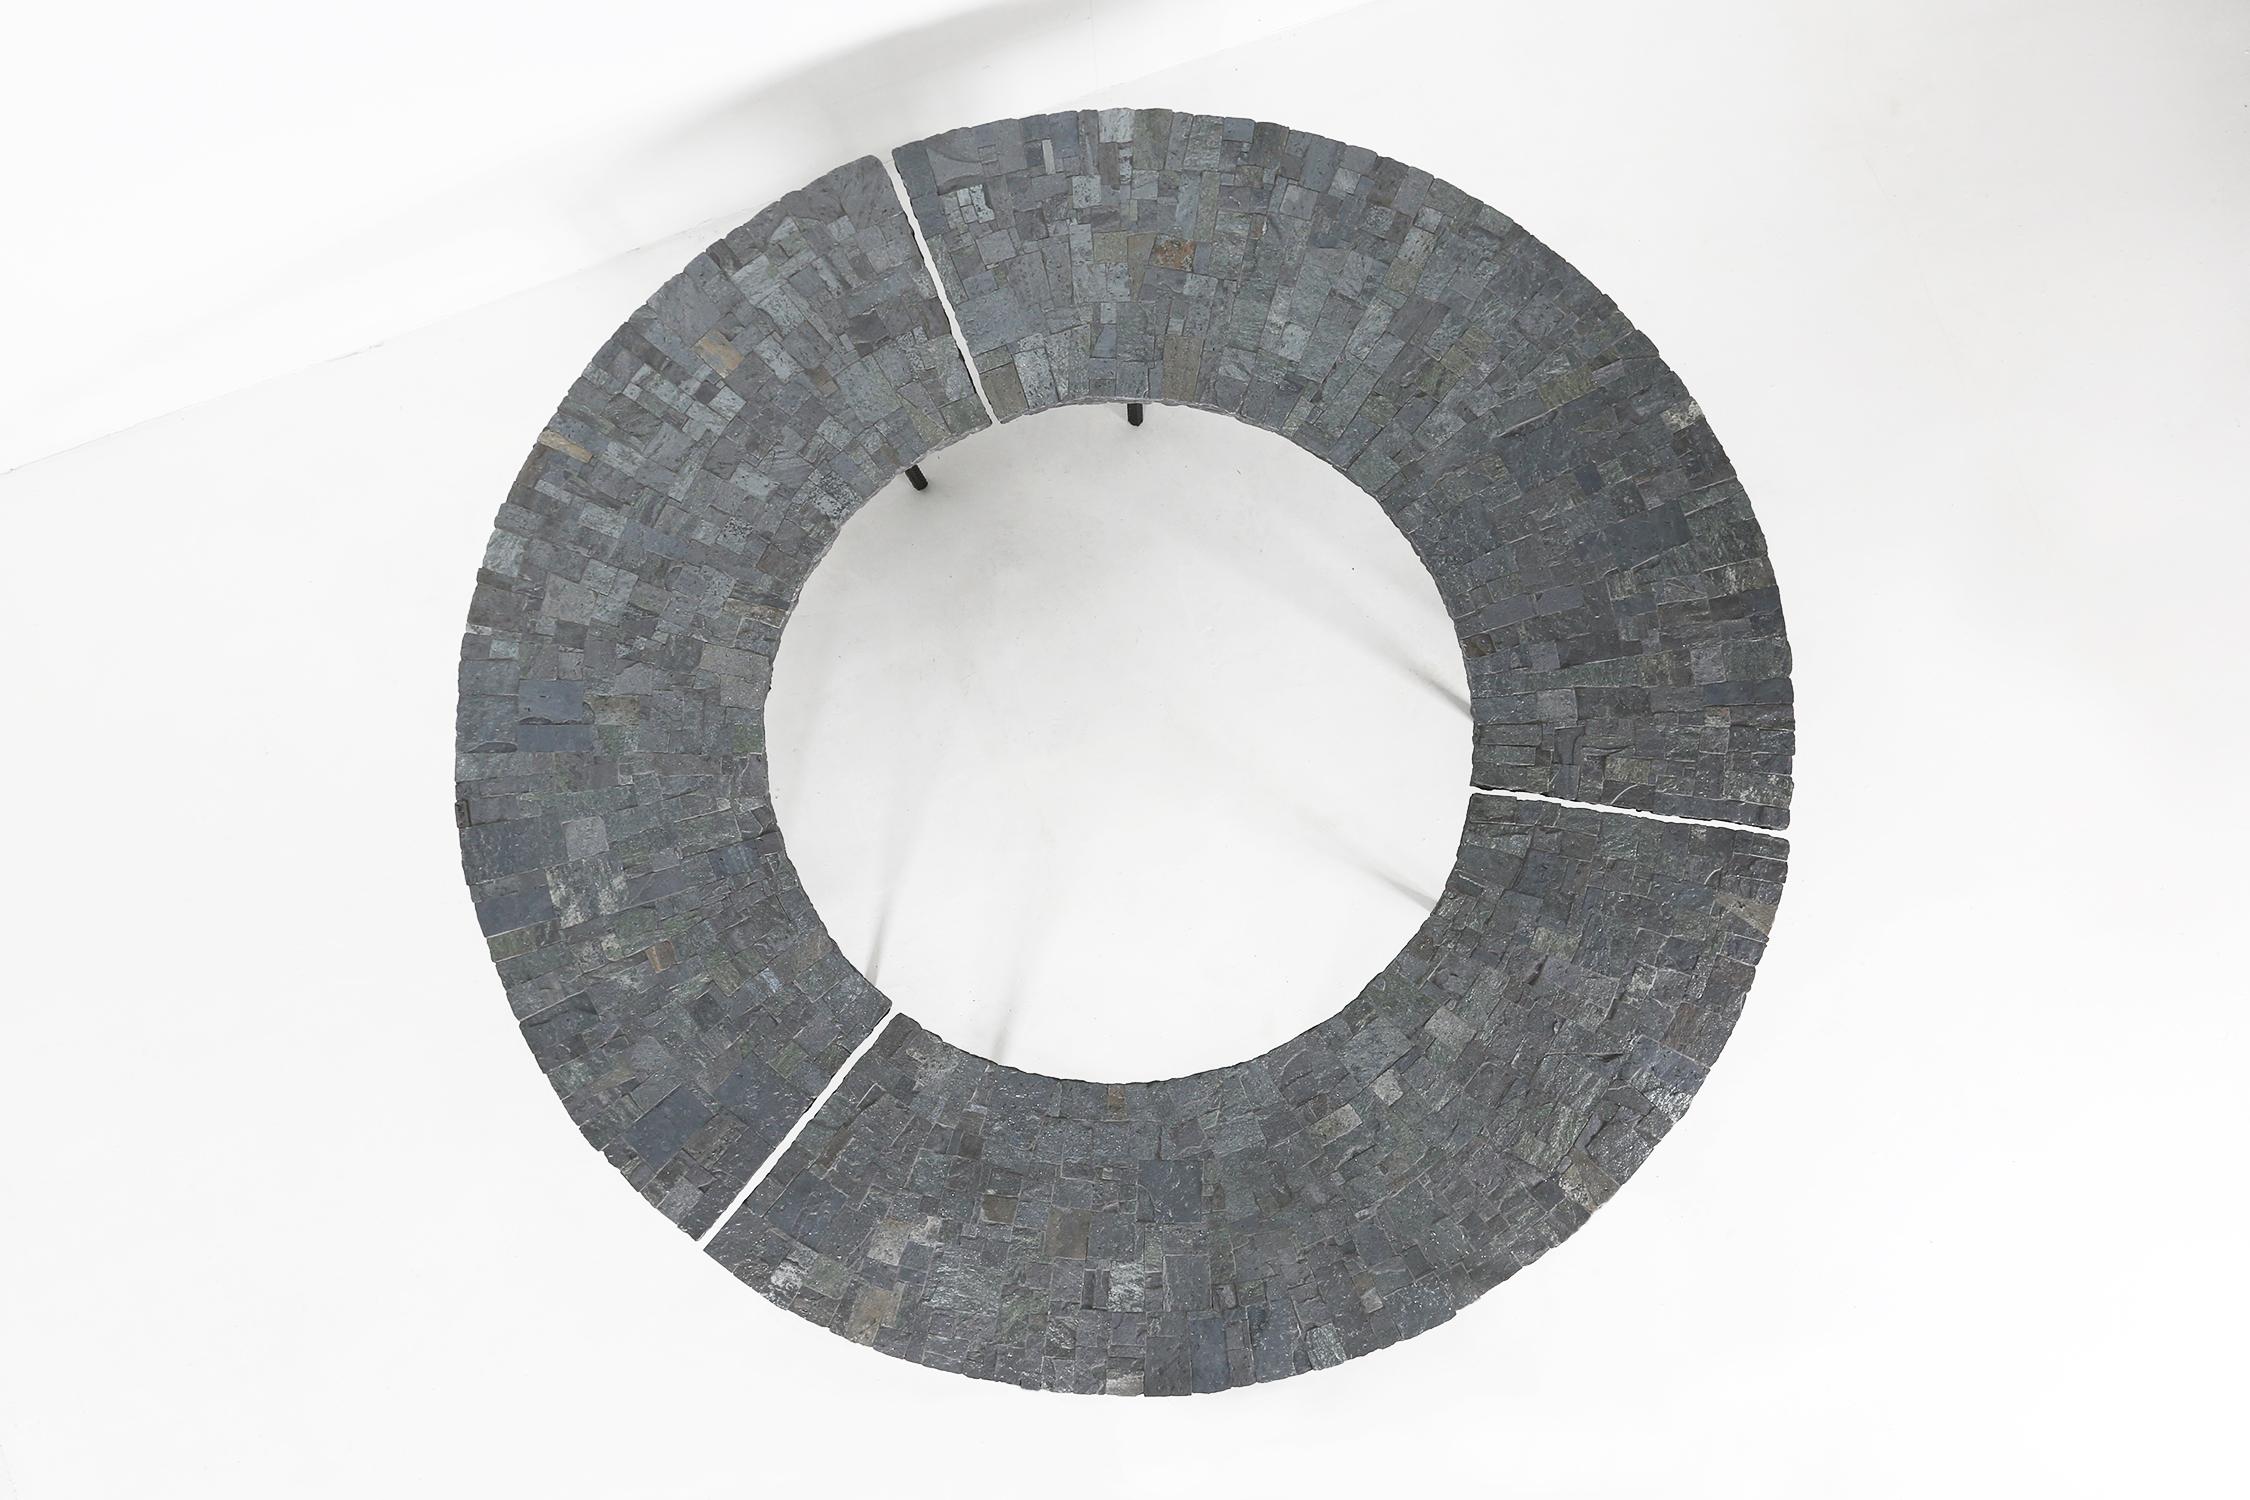 Very rare coffee table made by Belgian artist Pia Manu.
Made of brazilian slate stone and a rebar steel base.
The table has a very brutalist look and the slate stone has a sparkle.

Can be placed in a circle or can be placed side by side in an